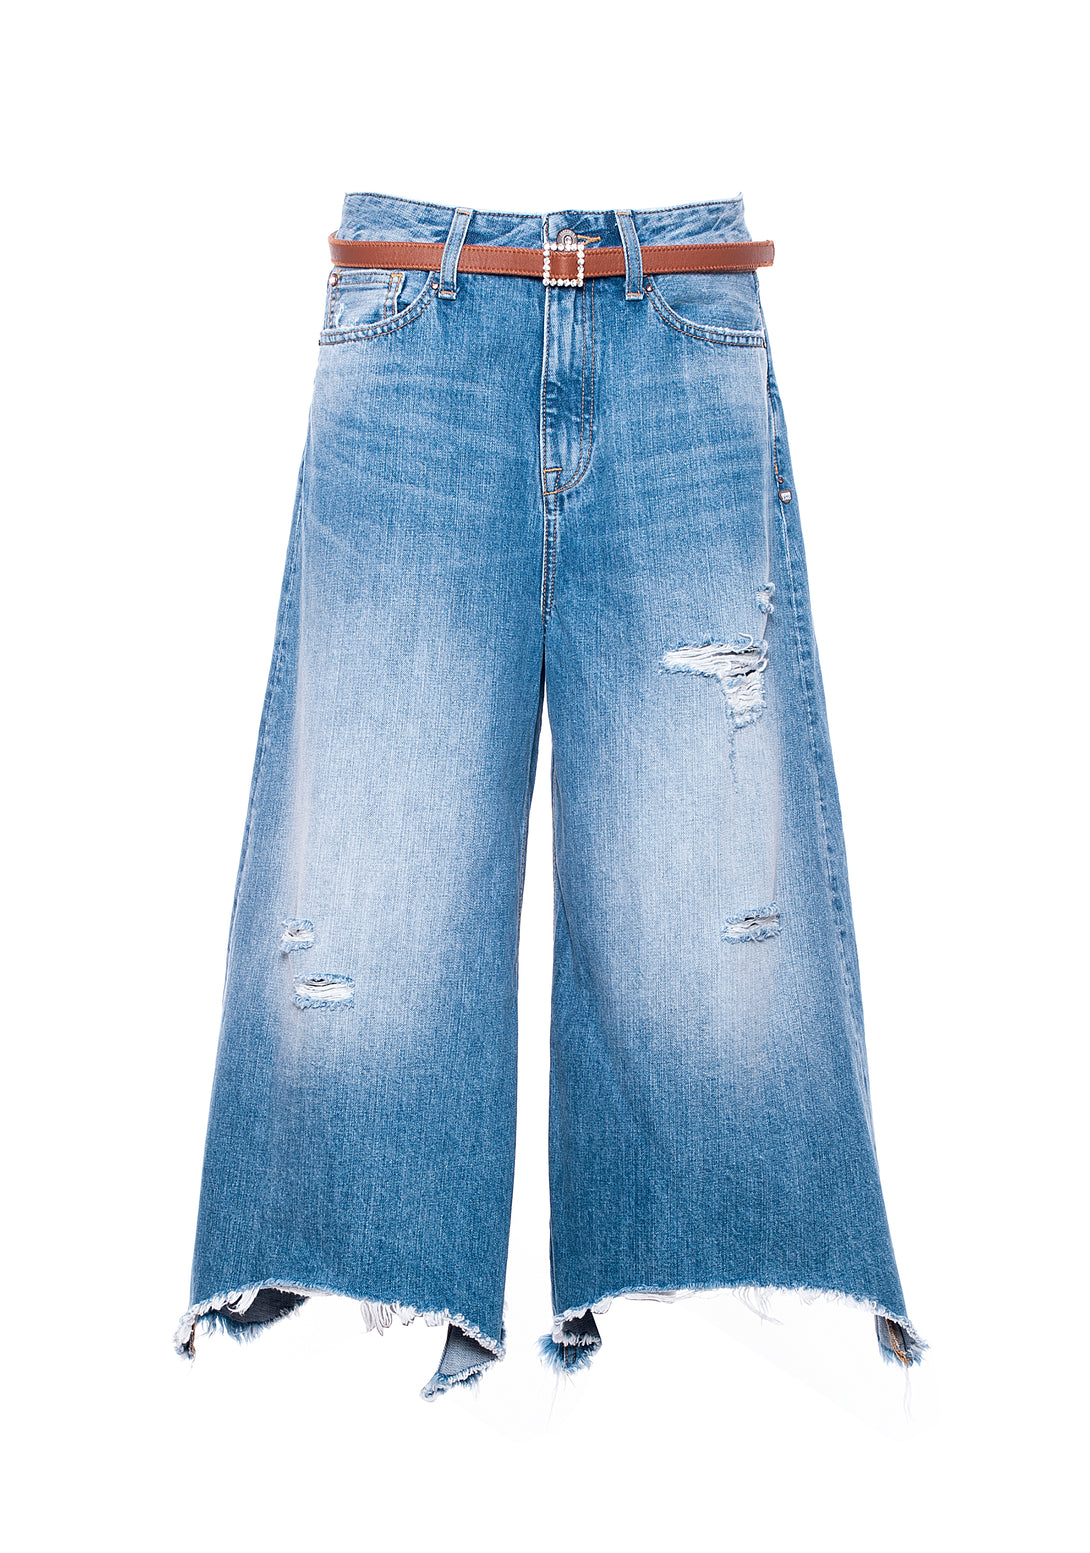 Culotte jeans flared fit made in denim with middle wash and rips